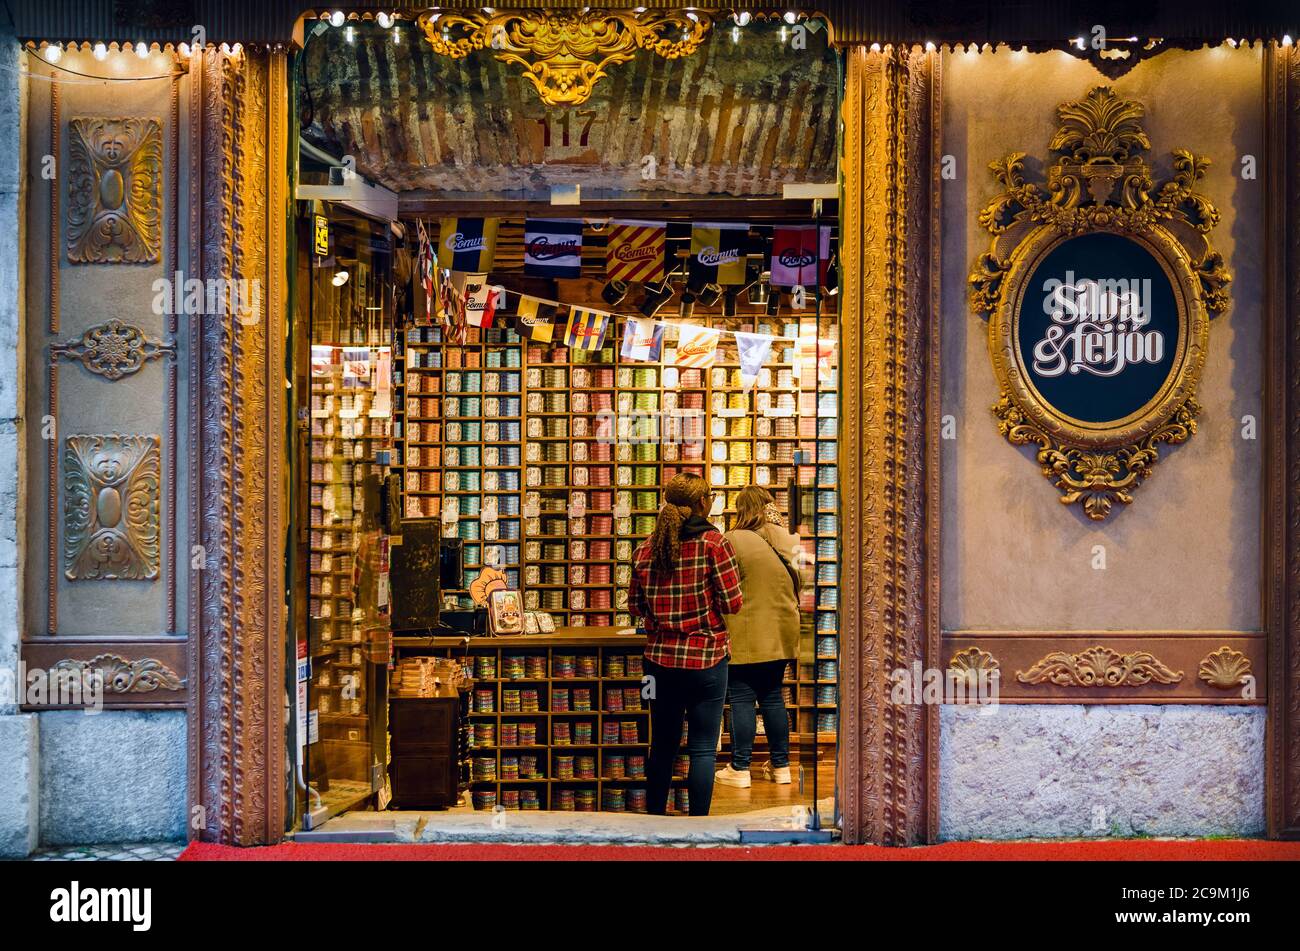 LISBON, PORTUGAL - FEBRUARY 2, 2019: Old Silva and Feijoo shop in Lisbon downtown, portugal, very famous traditional portuguese gastronomy store selli Stock Photo